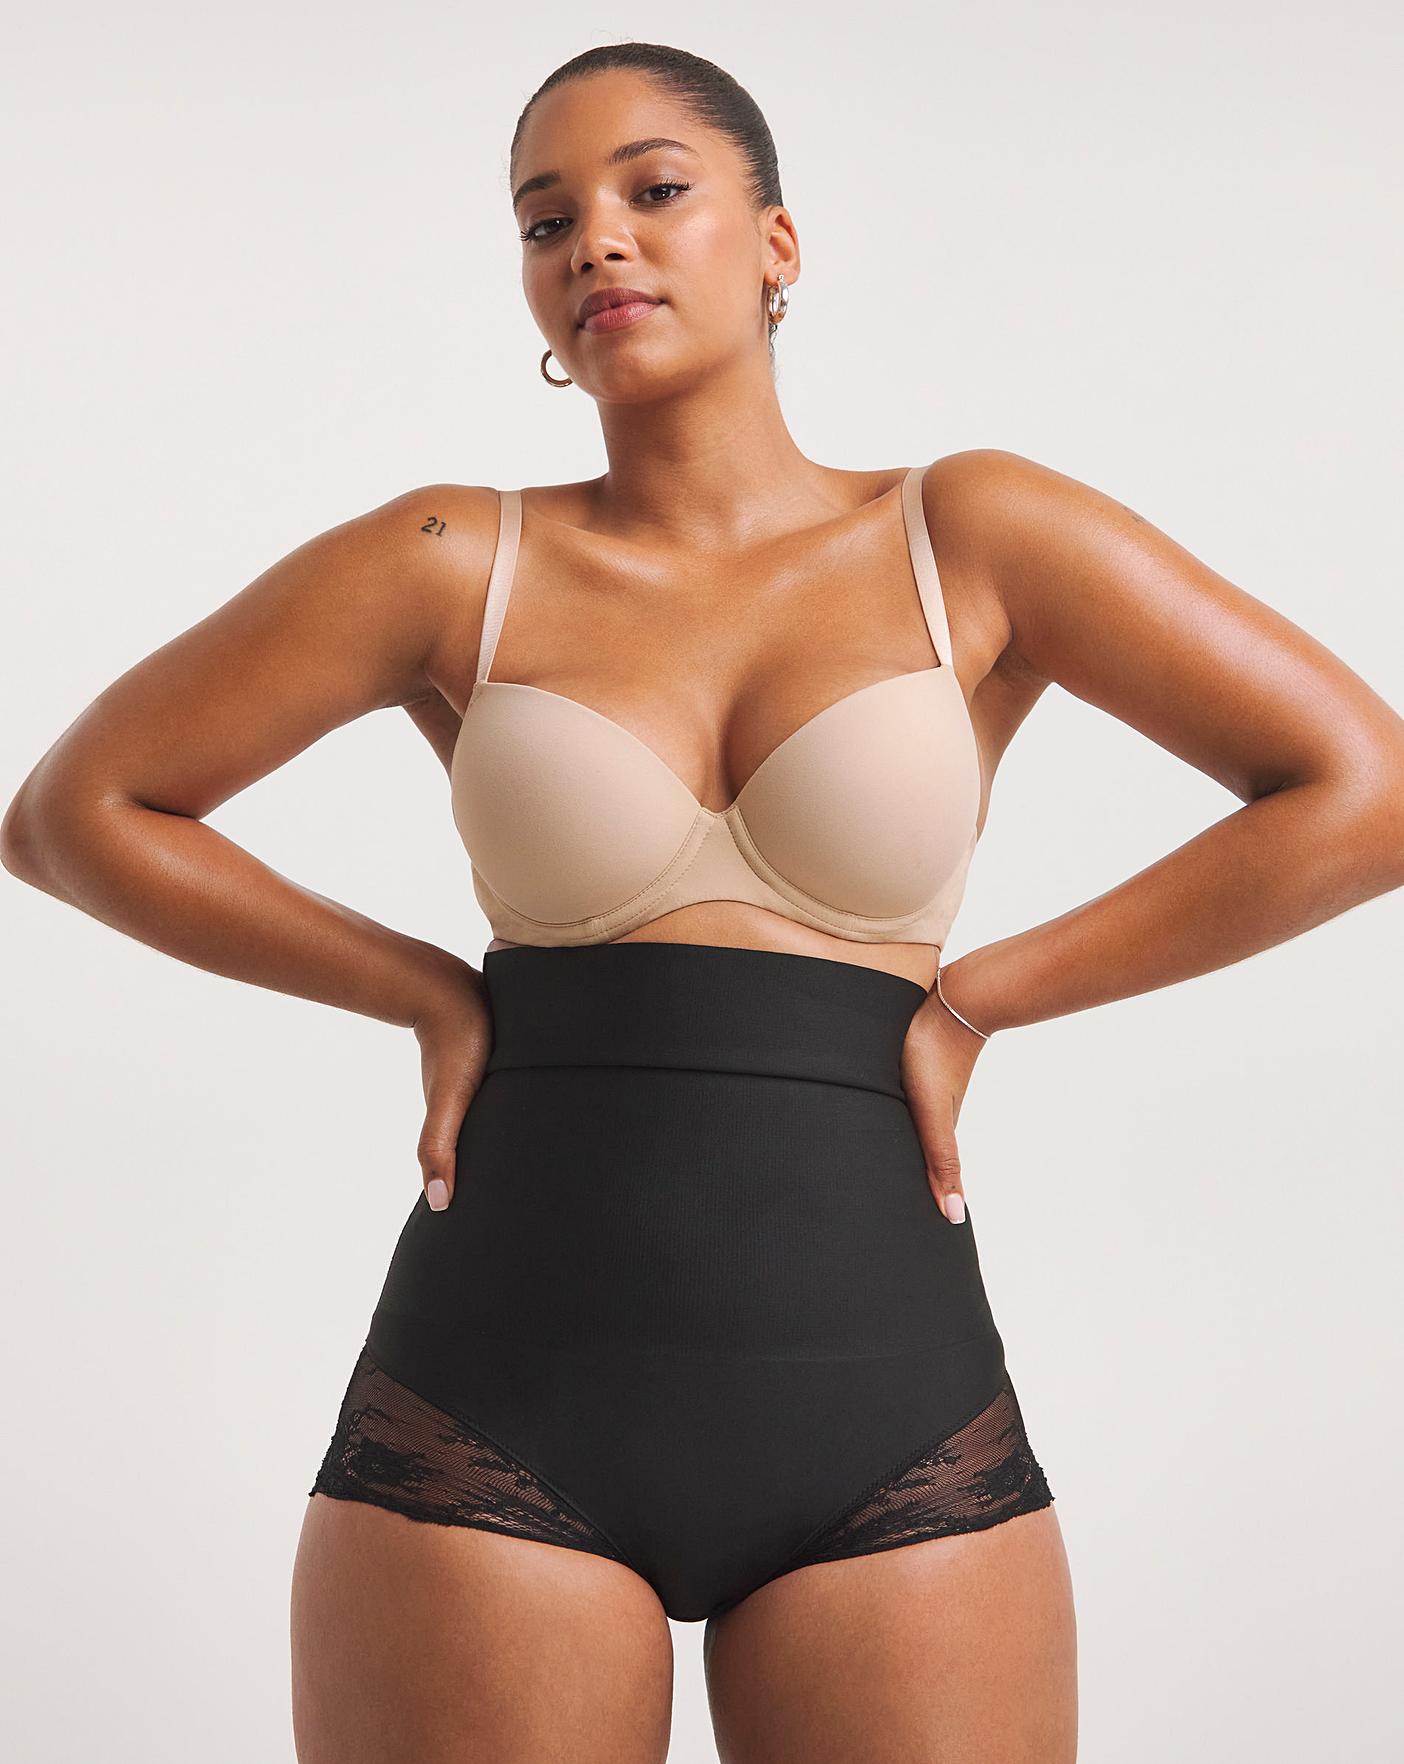 Maidenform Tame Your Tummy Shaping Brief - Nude • Price »